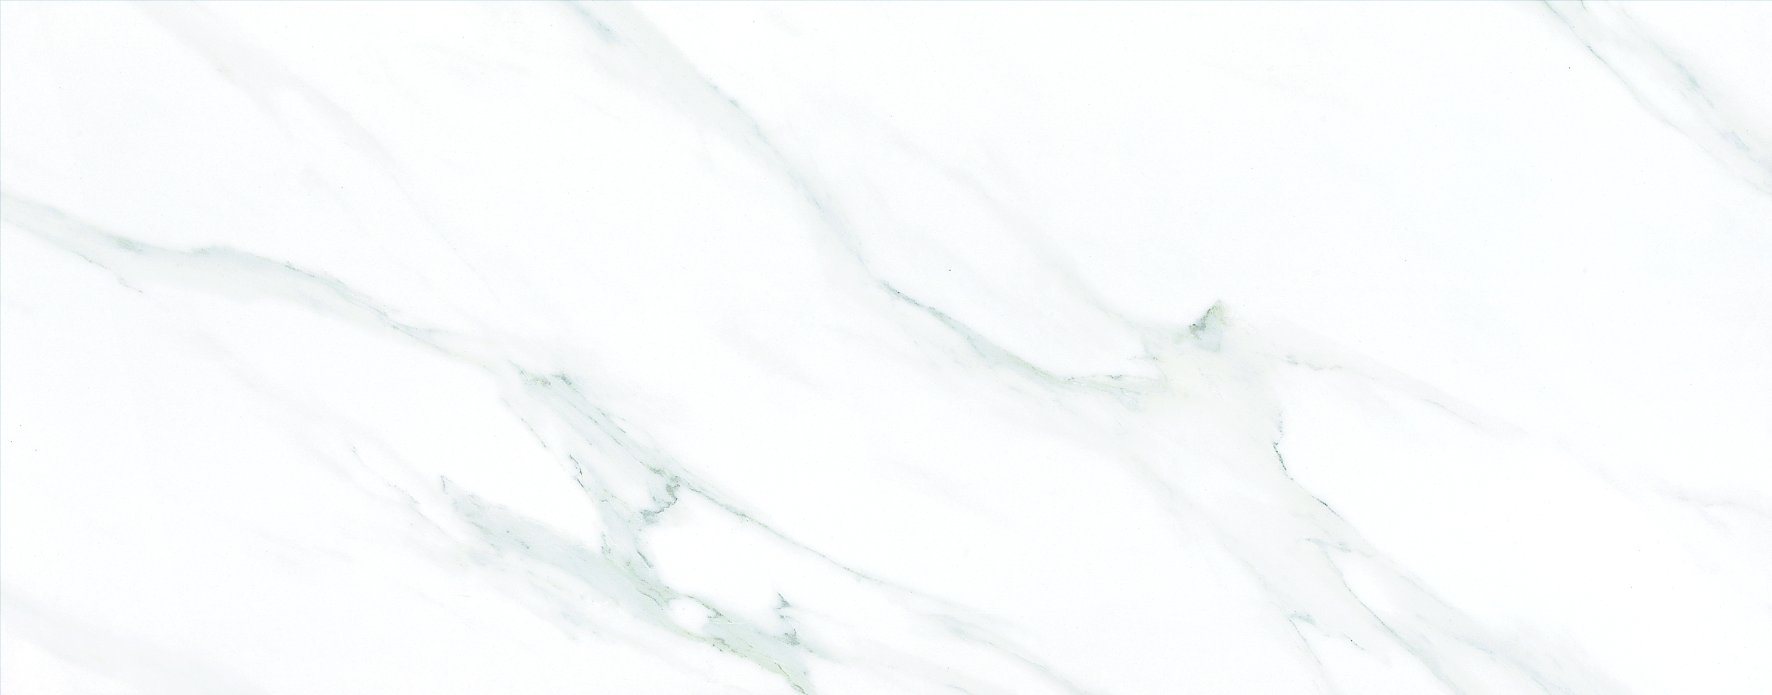 Natural European Specification Polished Surface Marble Wall or Floor Ceramics Tile 1200*470mm (VAK1200P)